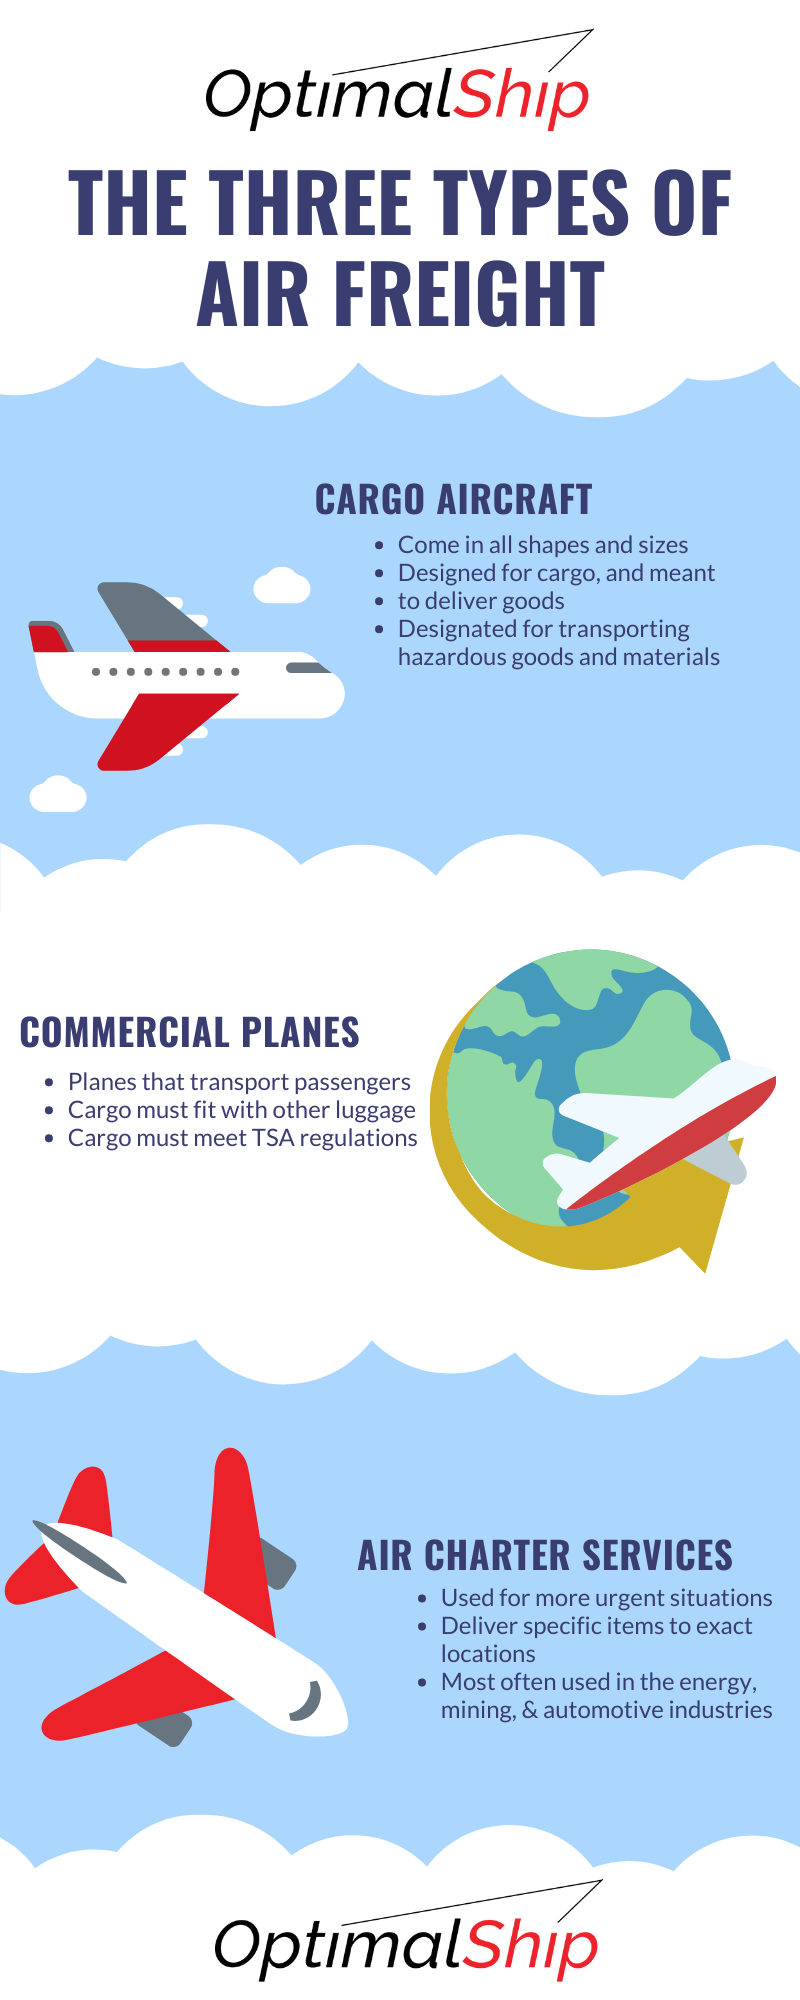 The three types of air freight